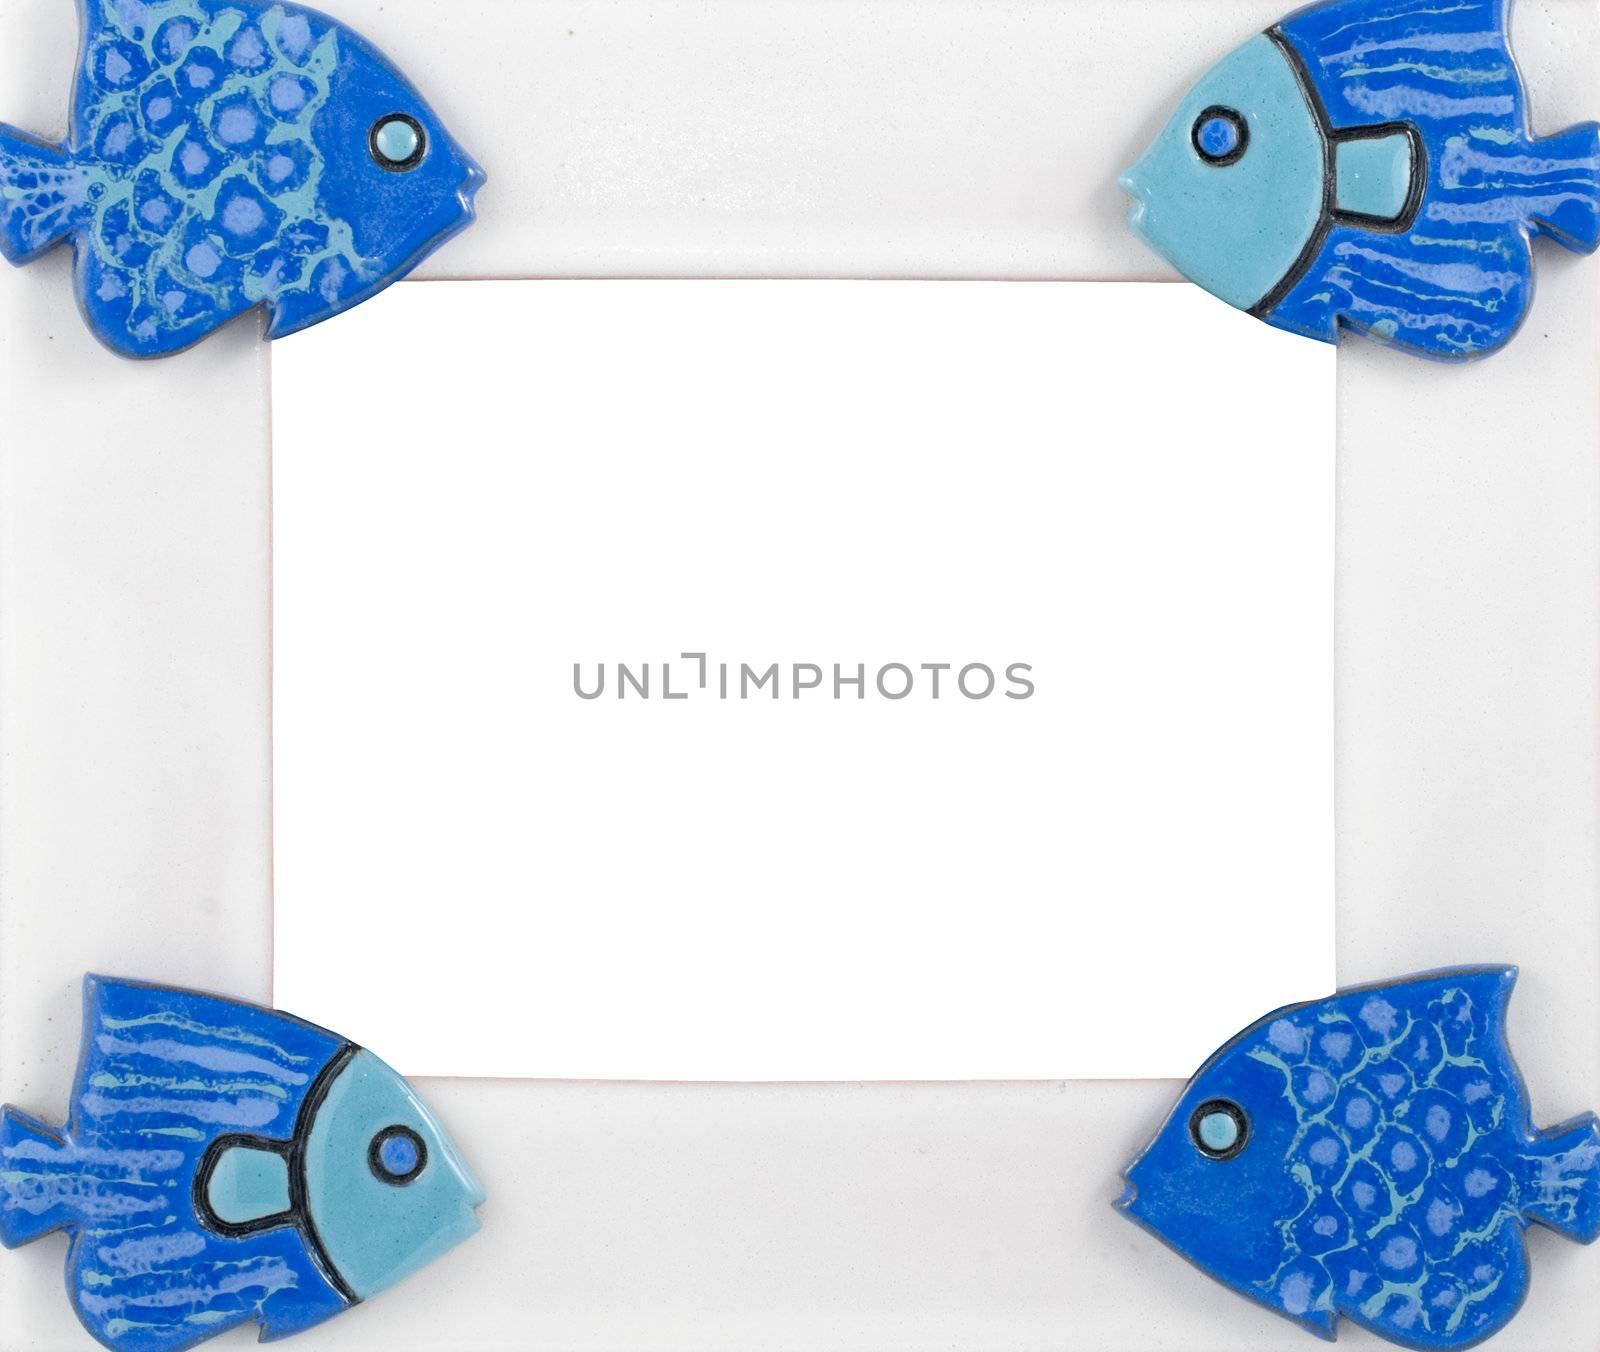 A colorful ceramic picture frame isolated on white background.